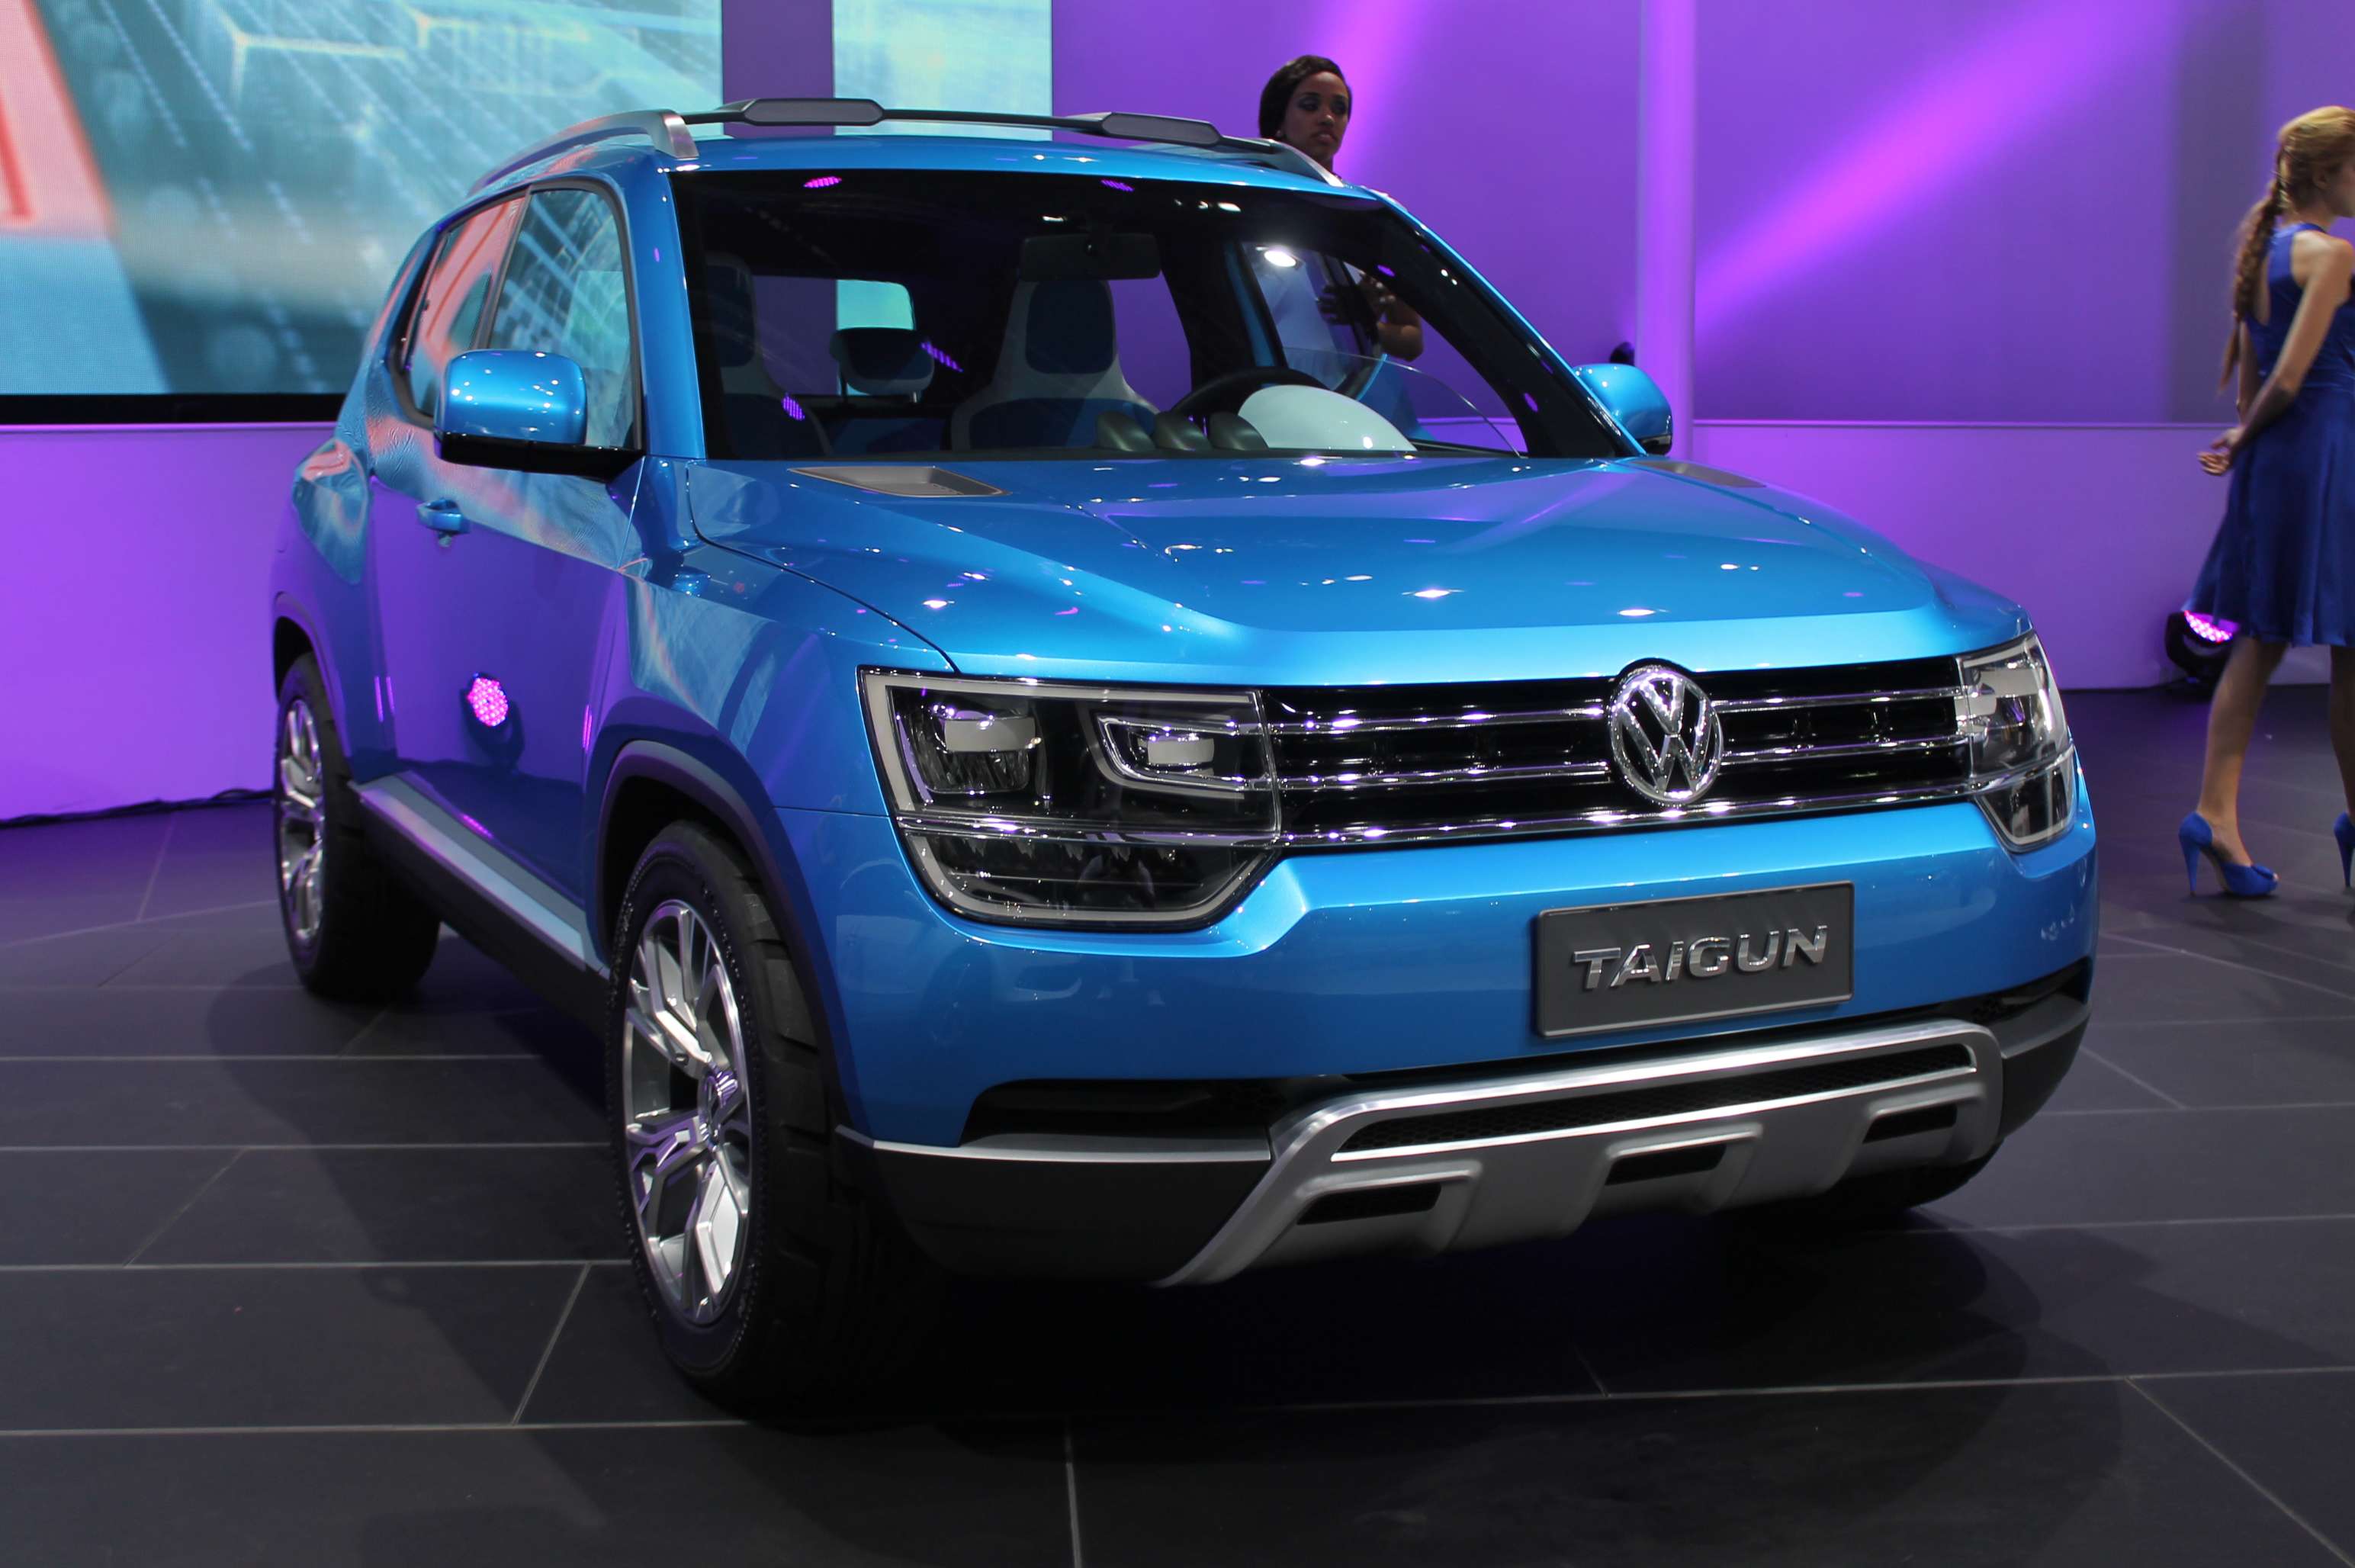 Production Taigun To Be Unveiled At The 2014 Delhi Auto Expo In